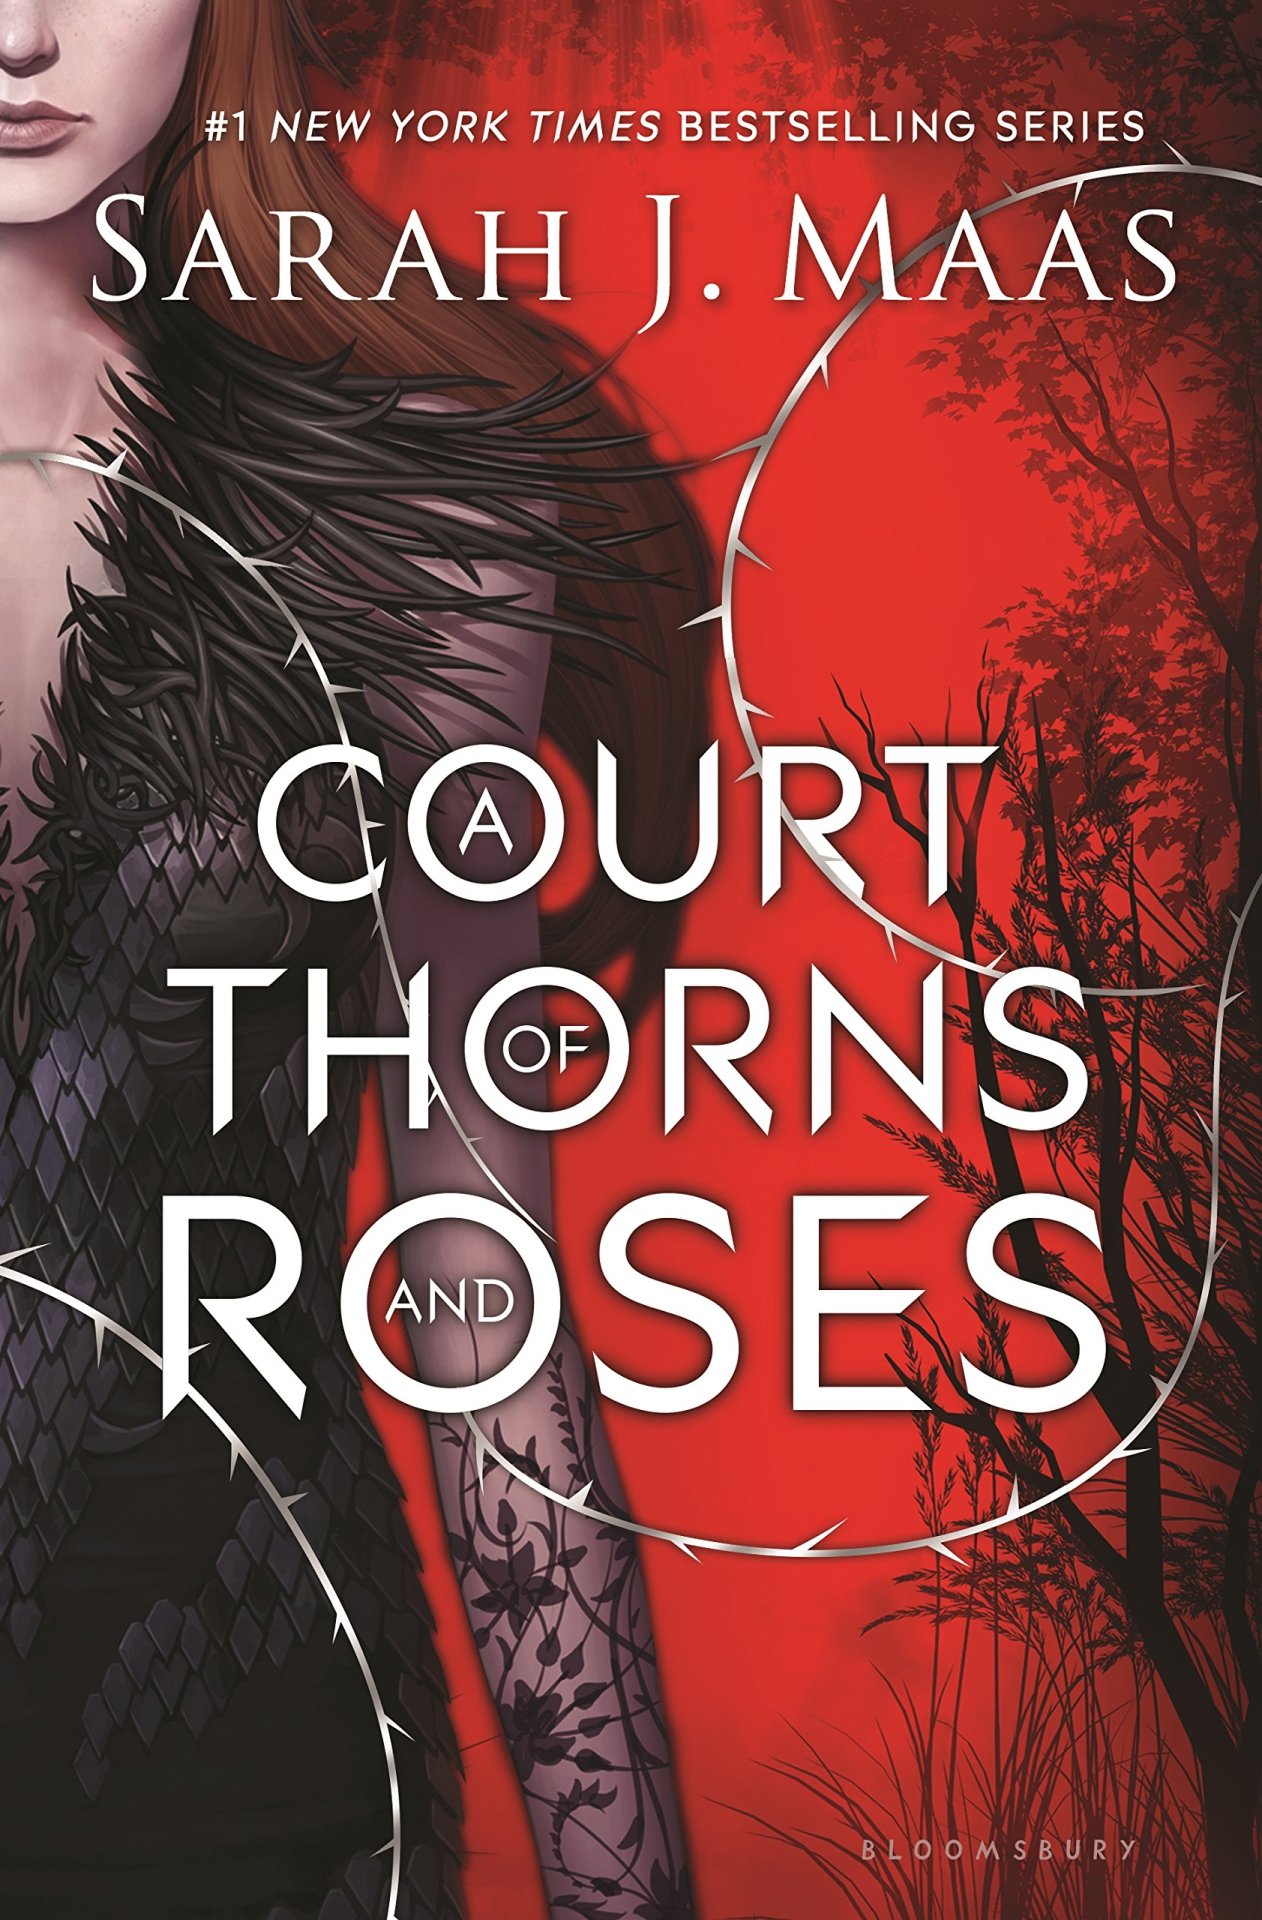 (via A Court of Thorns and Roses, Sarah J. Maas) A Court of Thorns and Roses by Sarah J. Maas is the book for youIf you enjoy retellings with newly imagined settings and plots filled with detail. It is nearly impossible to put down and so action-packed. This book is definitely a must-read! #acotar#books#reading#ya books